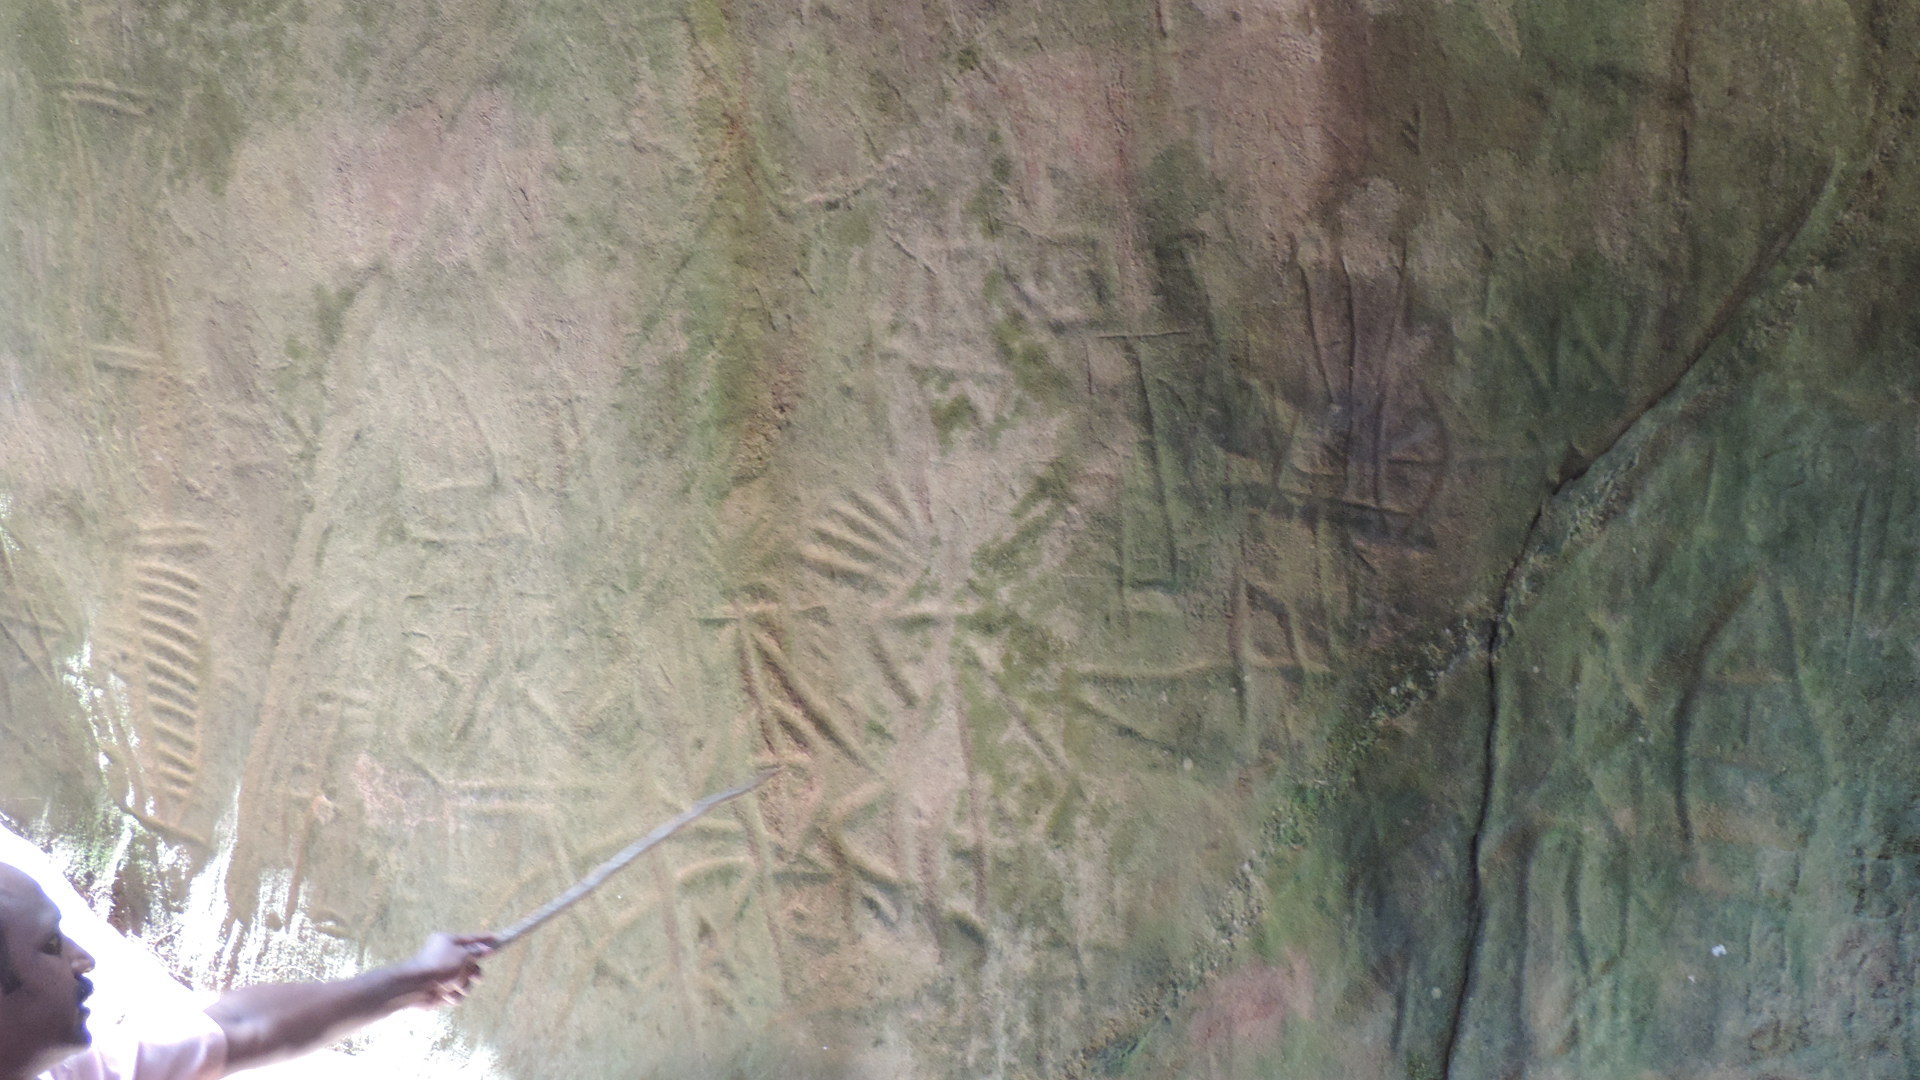 Several thousand year old rock carvings of people dancing